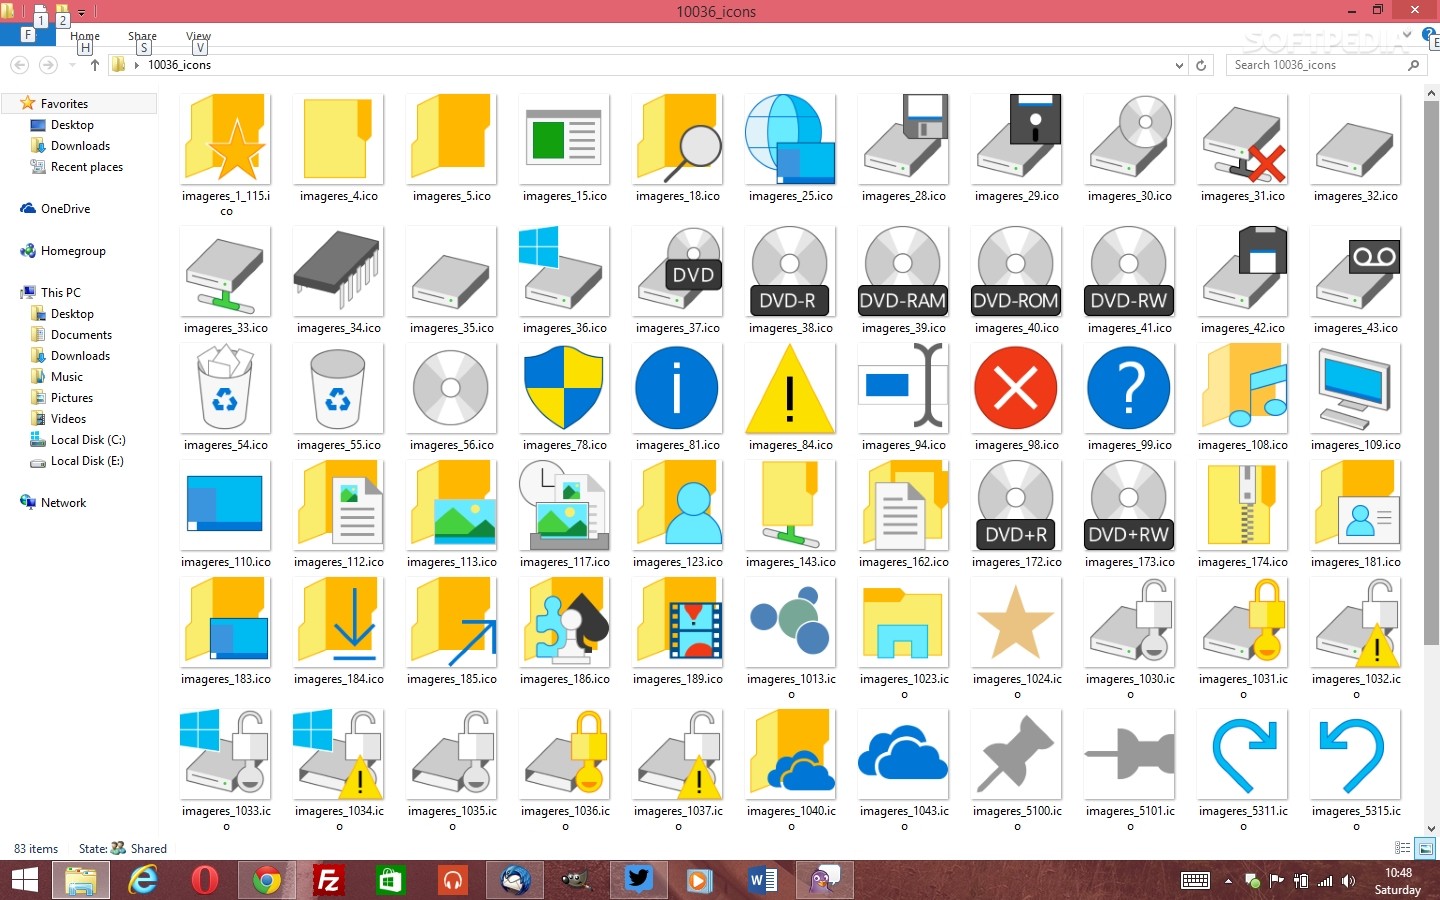 windows 10 icon pack free download